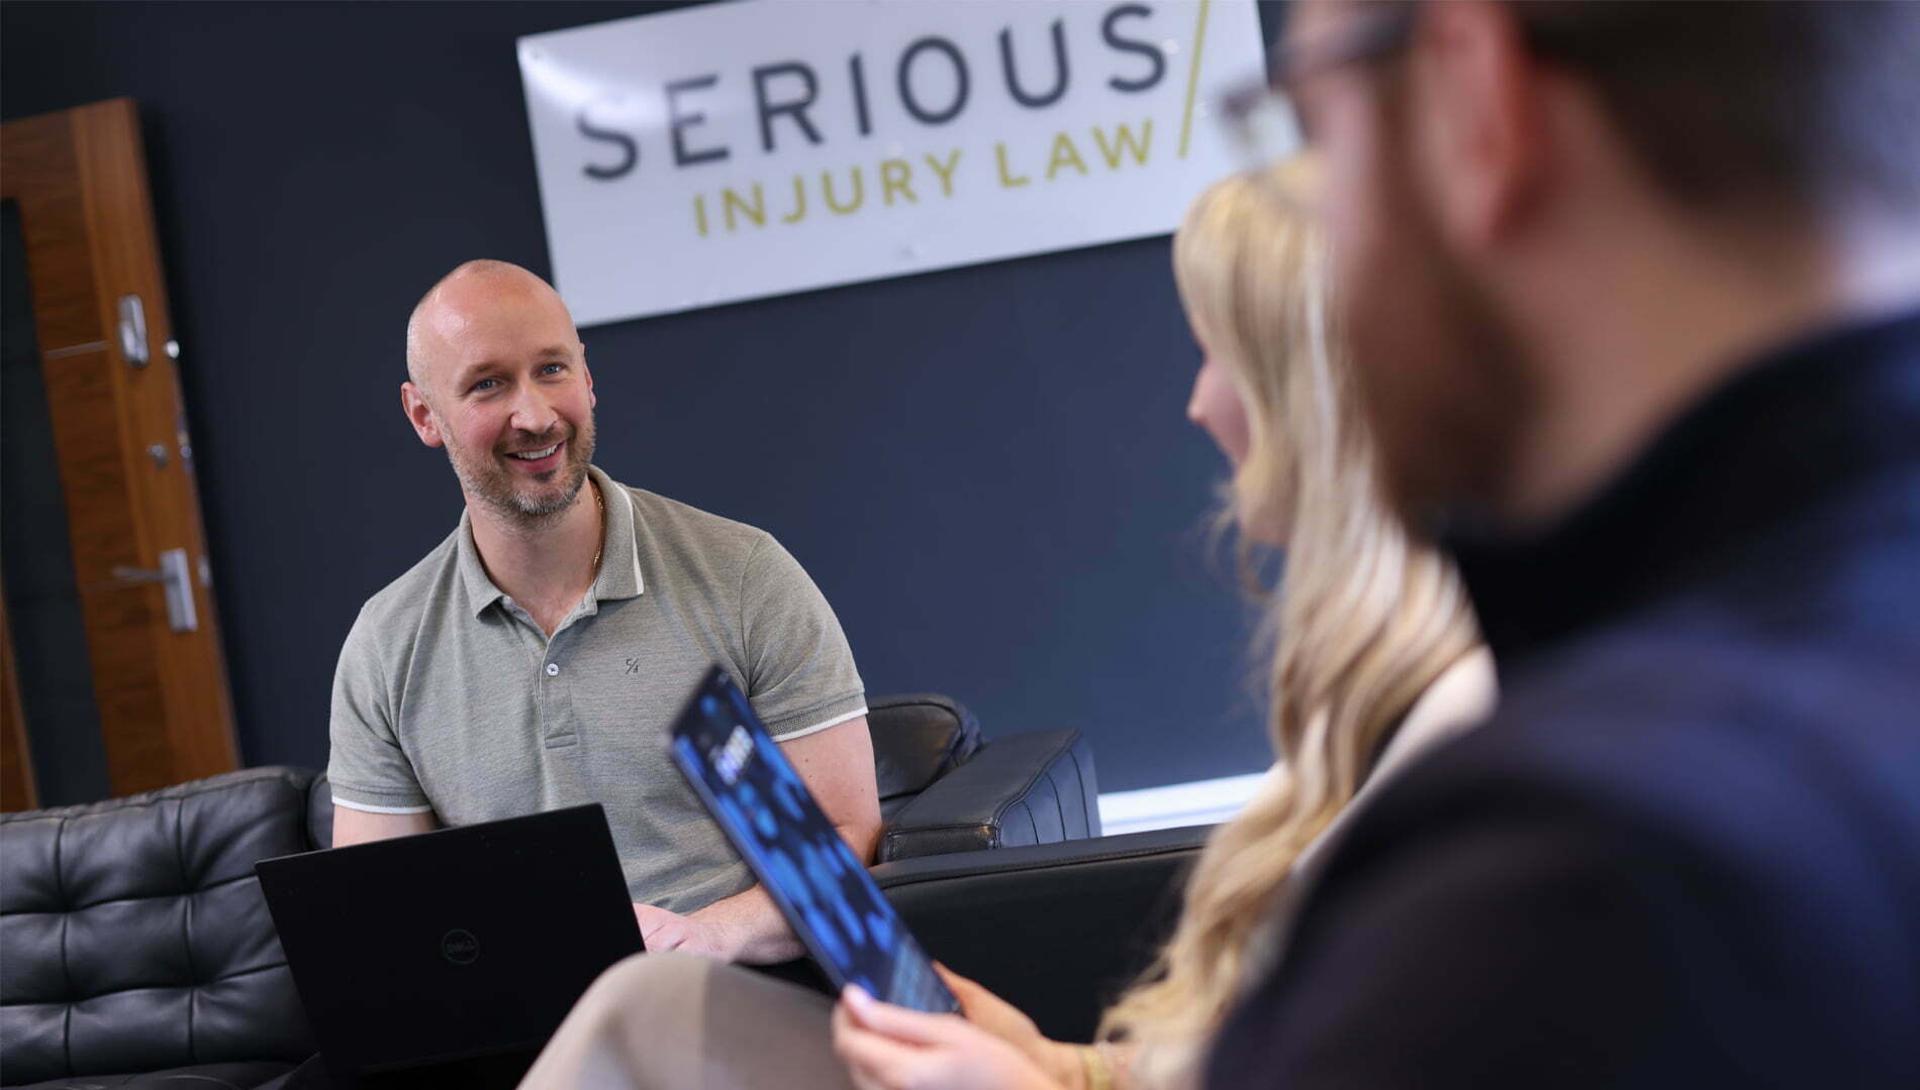 Private equity-backed group acquires severe injuries law firm